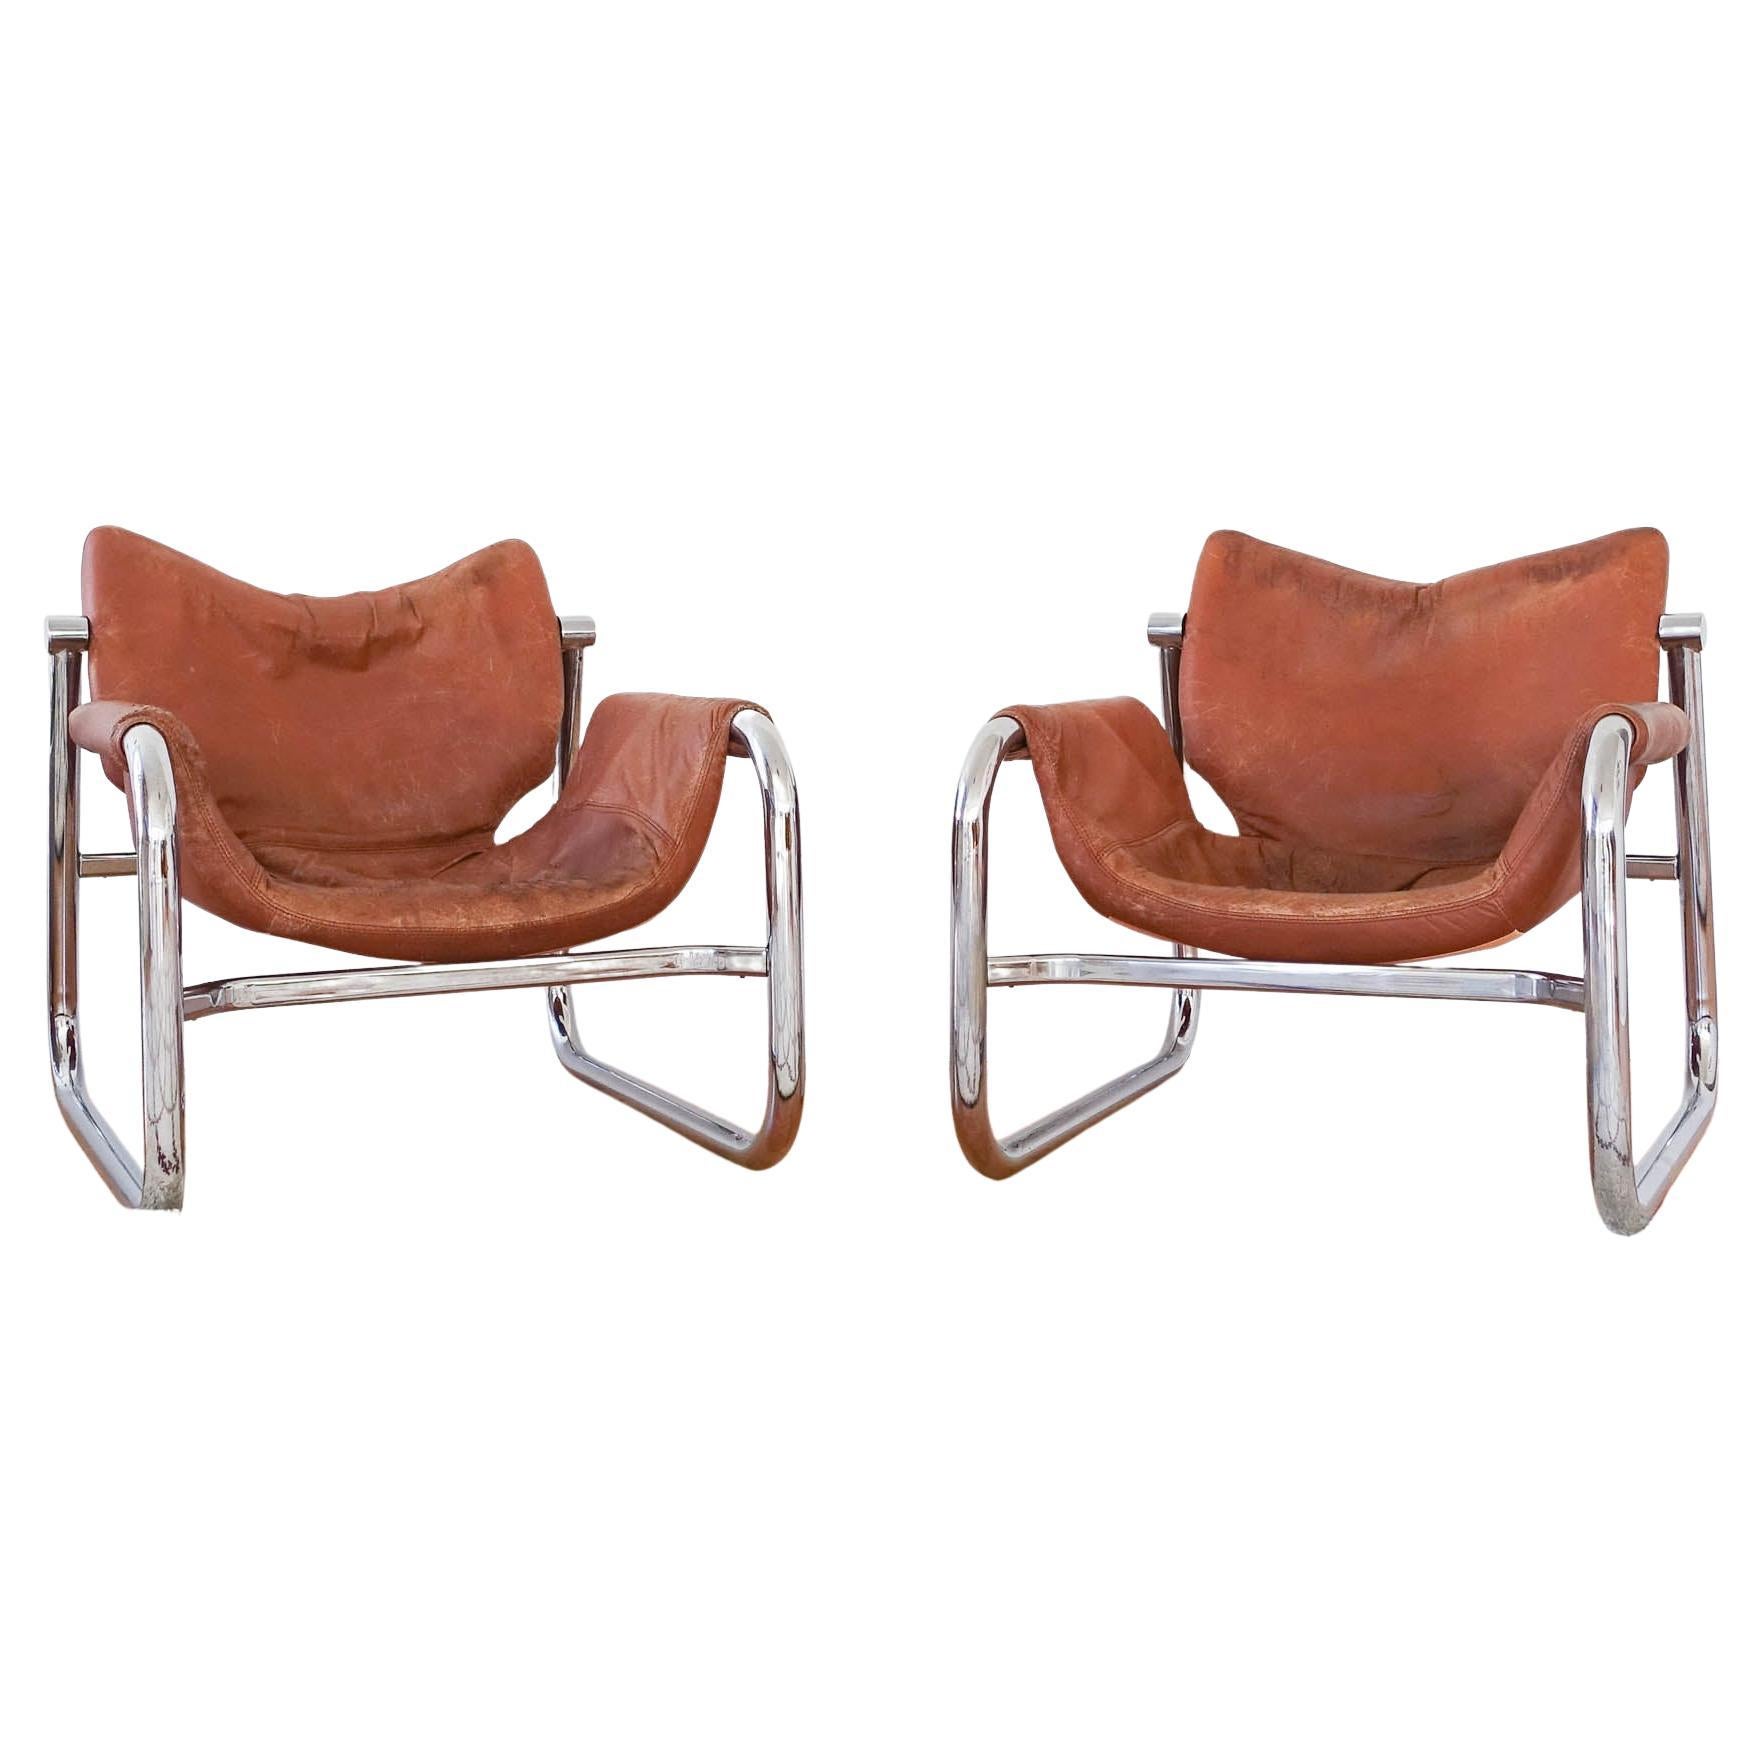 Pair of Alpha Lounge Chair by Maurice Burke for Pozza, Brazil, 1960s